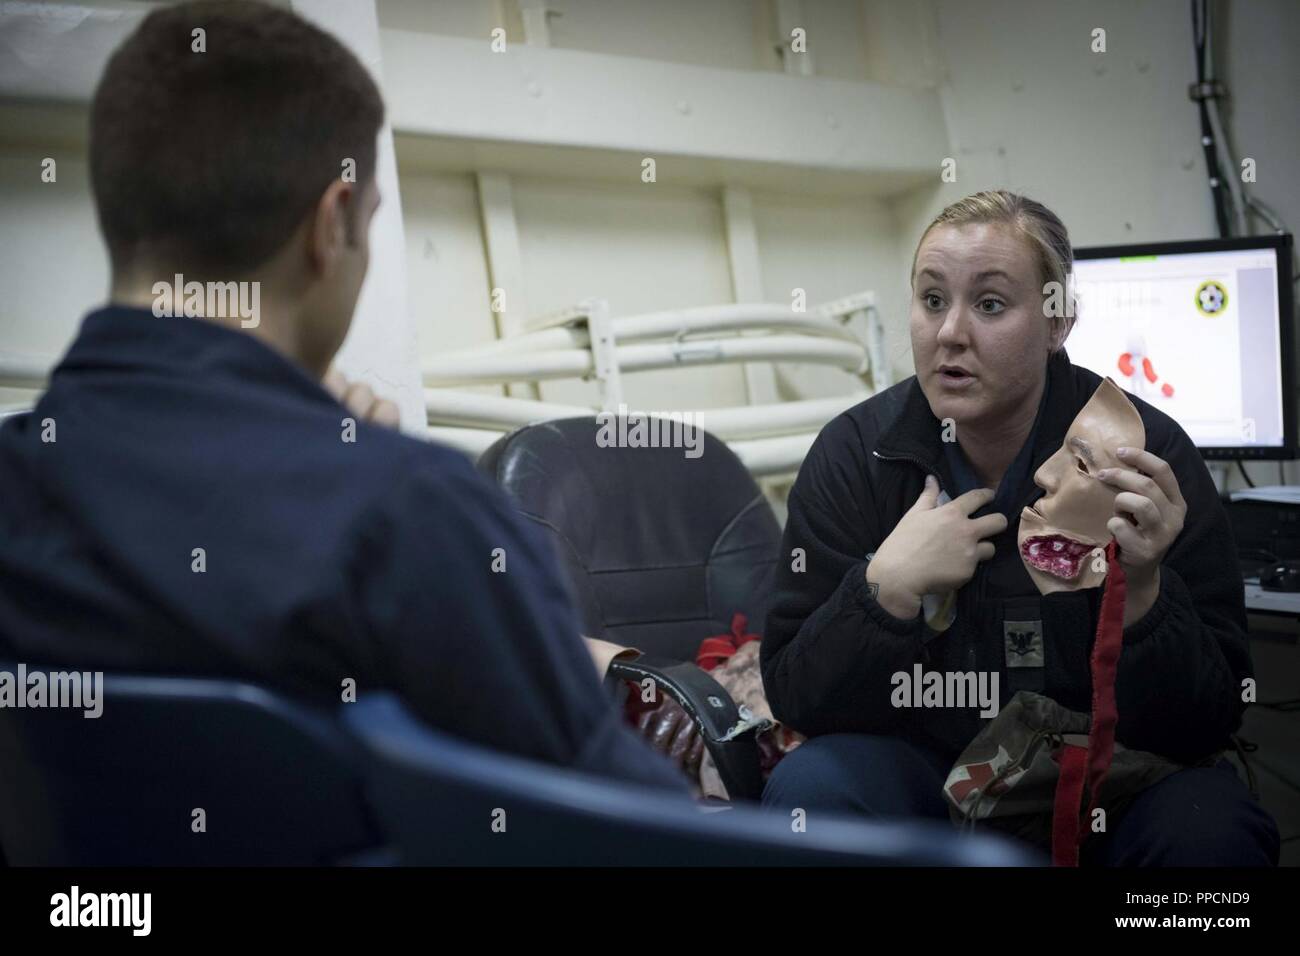 SEA (Aug. 29, 2018) Hospital Corpsman 3rd Class Kenzie Conard provides medical training aboard the Arleigh Burke-class guided-missile destroyer USS Carney (DDG 64) Aug. 29, 2018. Carney, forward-deployed to Rota, Spain, is on its fifth patrol in the U.S. 6th Fleet area of operations in support of regional allies and partners as well as U.S. national security interests in Europe and Africa. Stock Photo